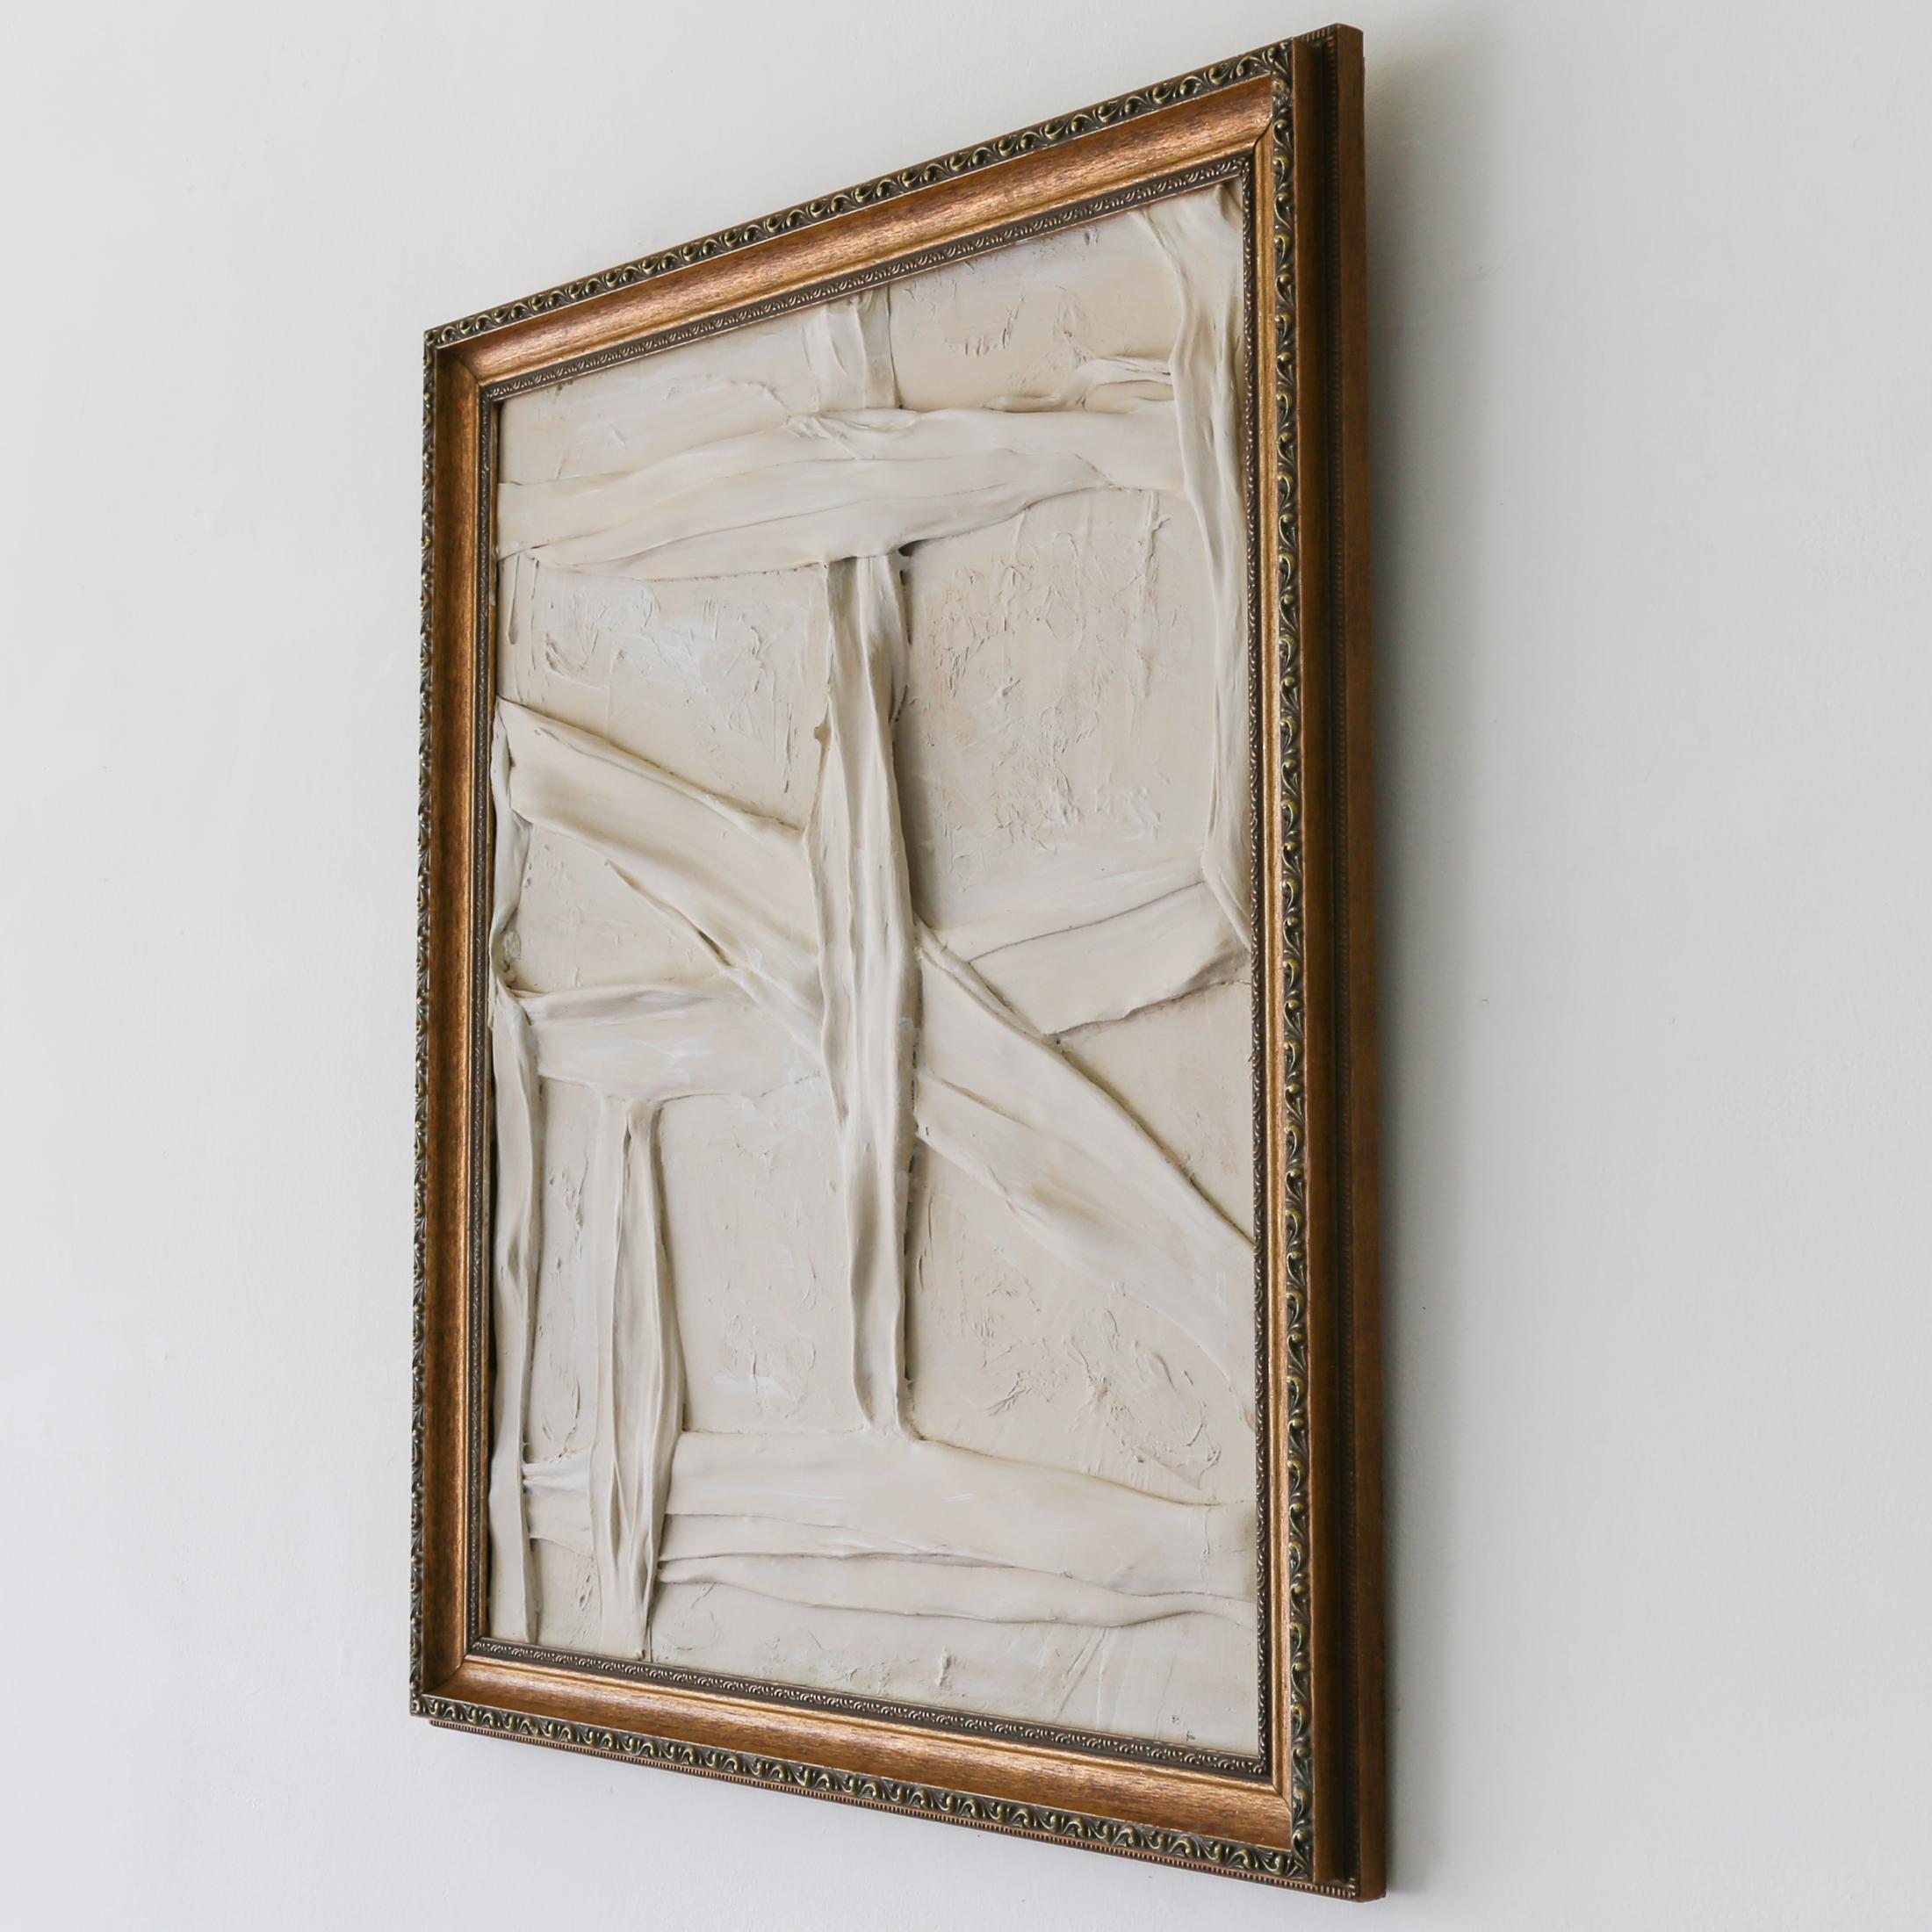 AMEE CALLOWAY
Avant Garde Layer White Linen
• mixed media
24.00w x 29.00h x 2.00d in
$900.00